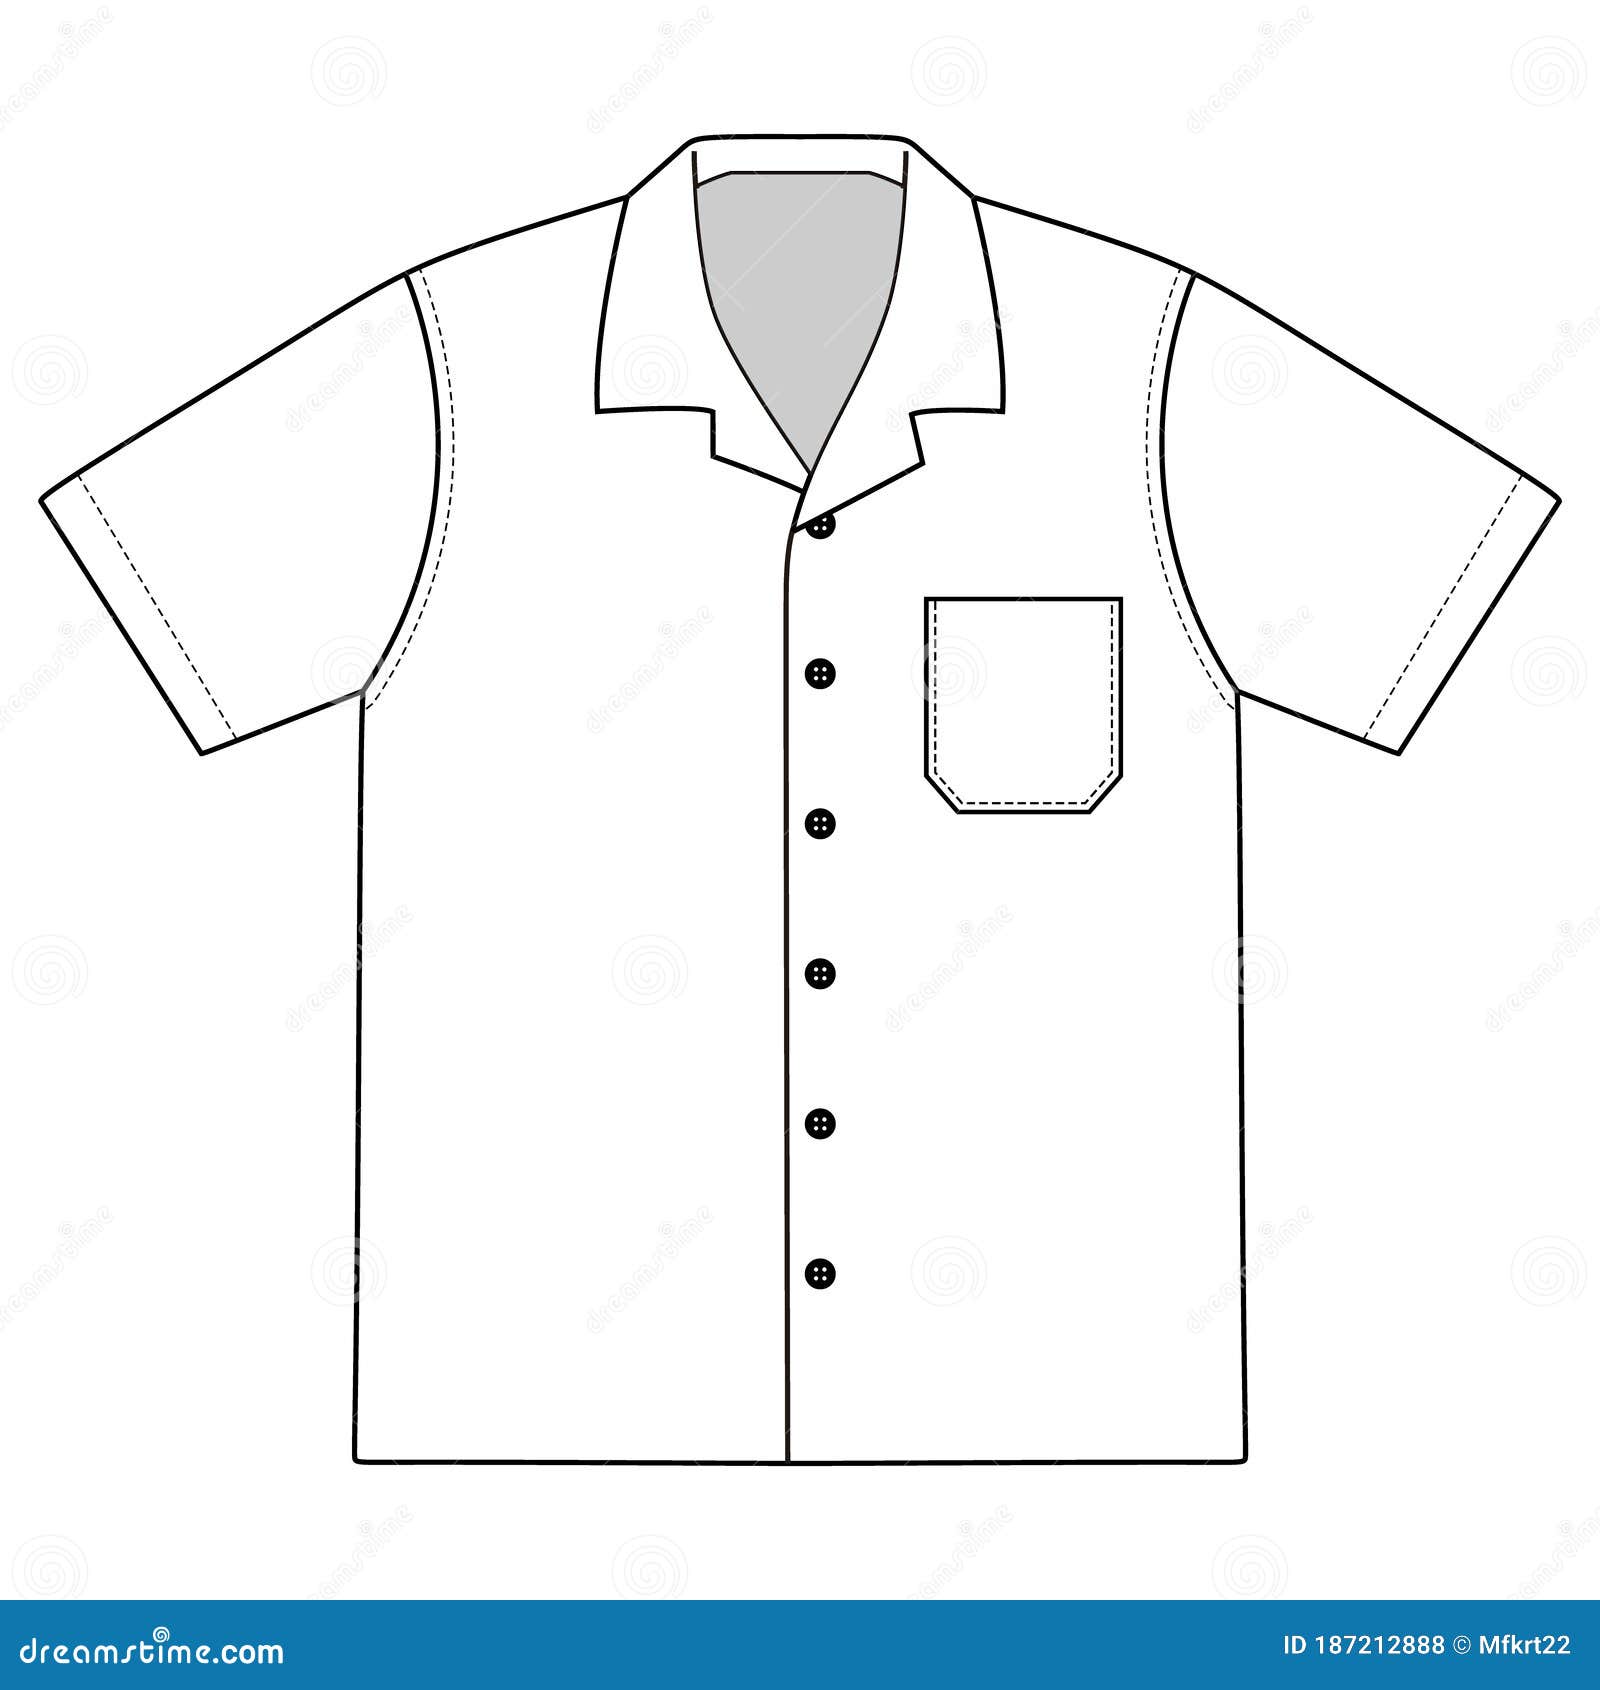 Download Bowling Shirt Vector Outline Template Stock Vector ...